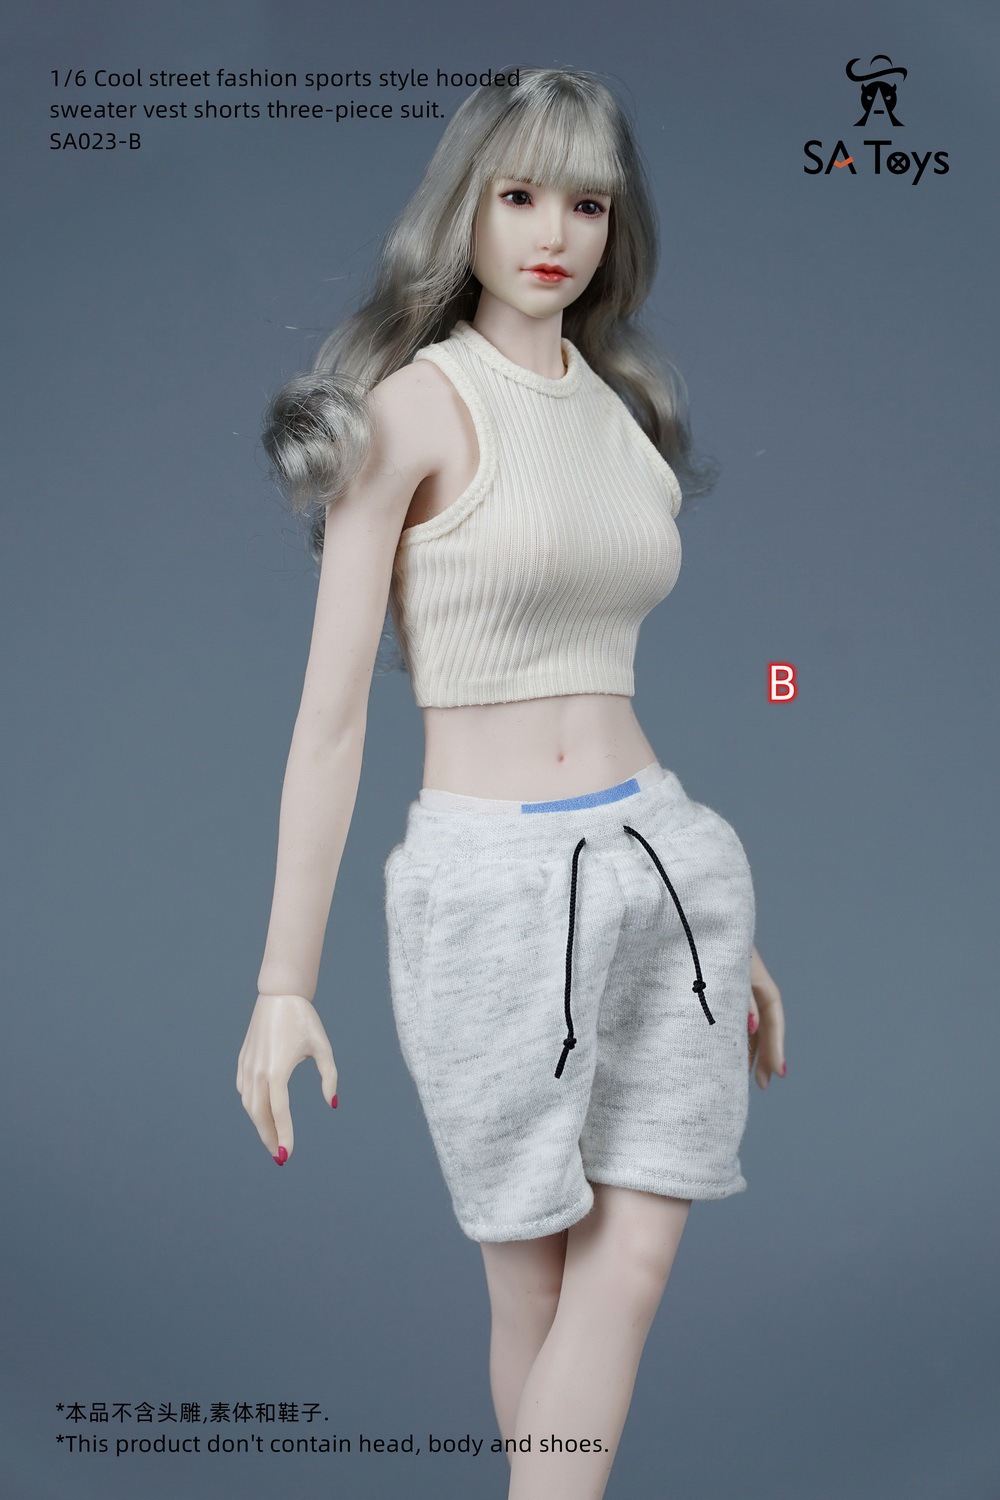 floralskirt - NEW PRODUCT: SA Toys: 1/6 hip skirt / floral elastic skirt / fashionable sports style hooded sweater cover, hip-hop fisherman hat halter and footwear casual pants [variety optional] 17020112